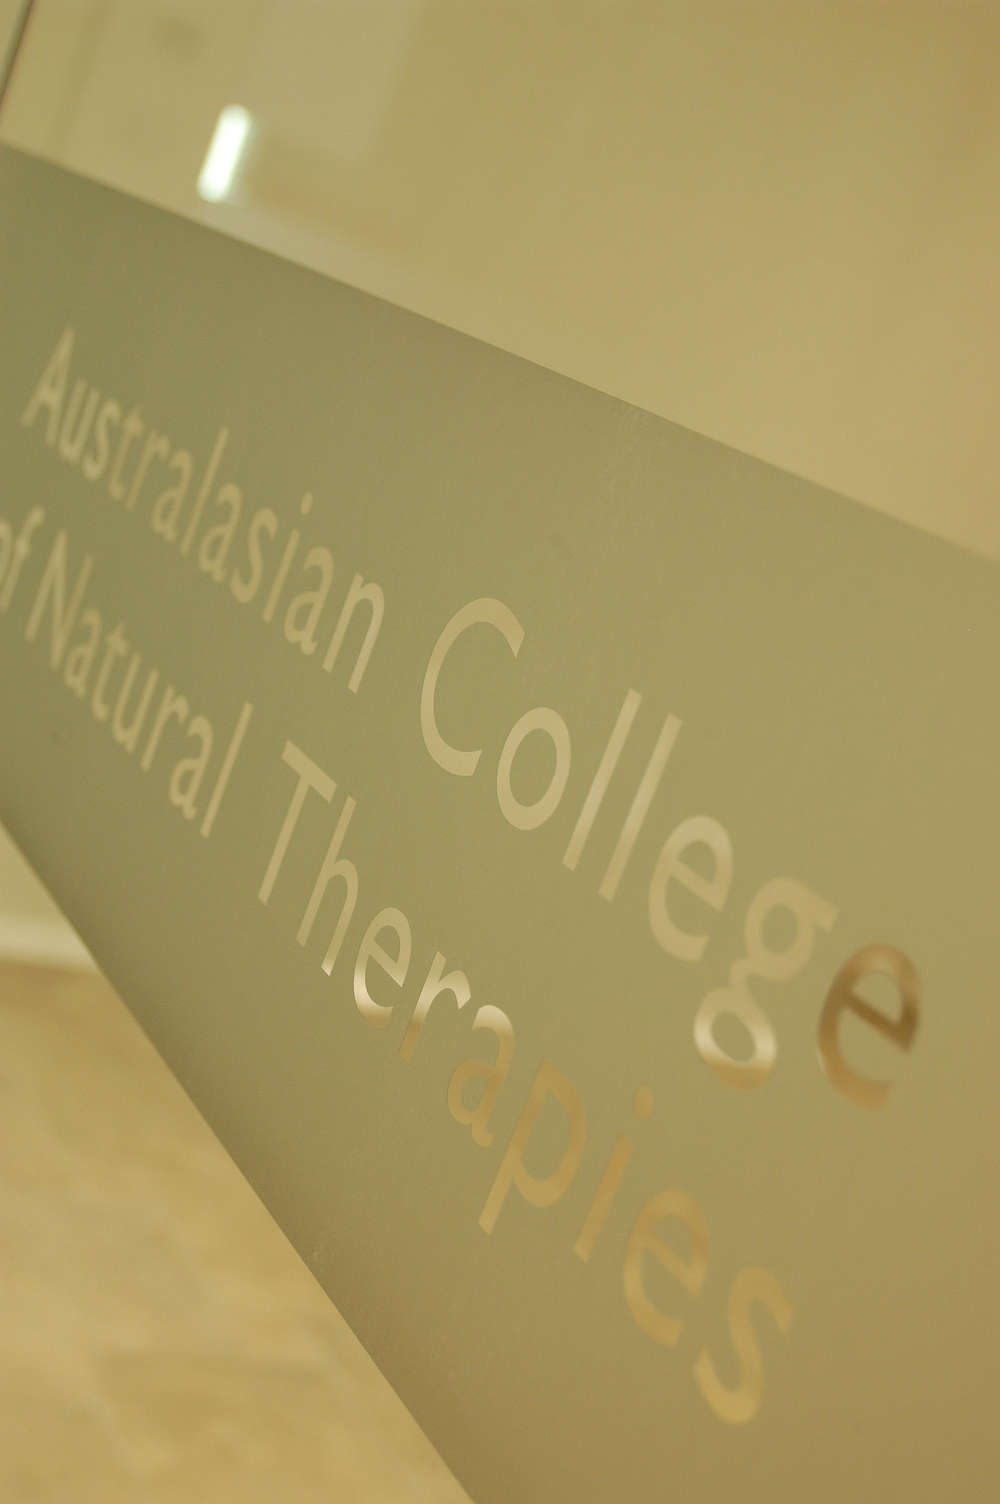 AUSTRALASIAN COLLEGE OF NATURAL THERAPIESʣãΣԡ